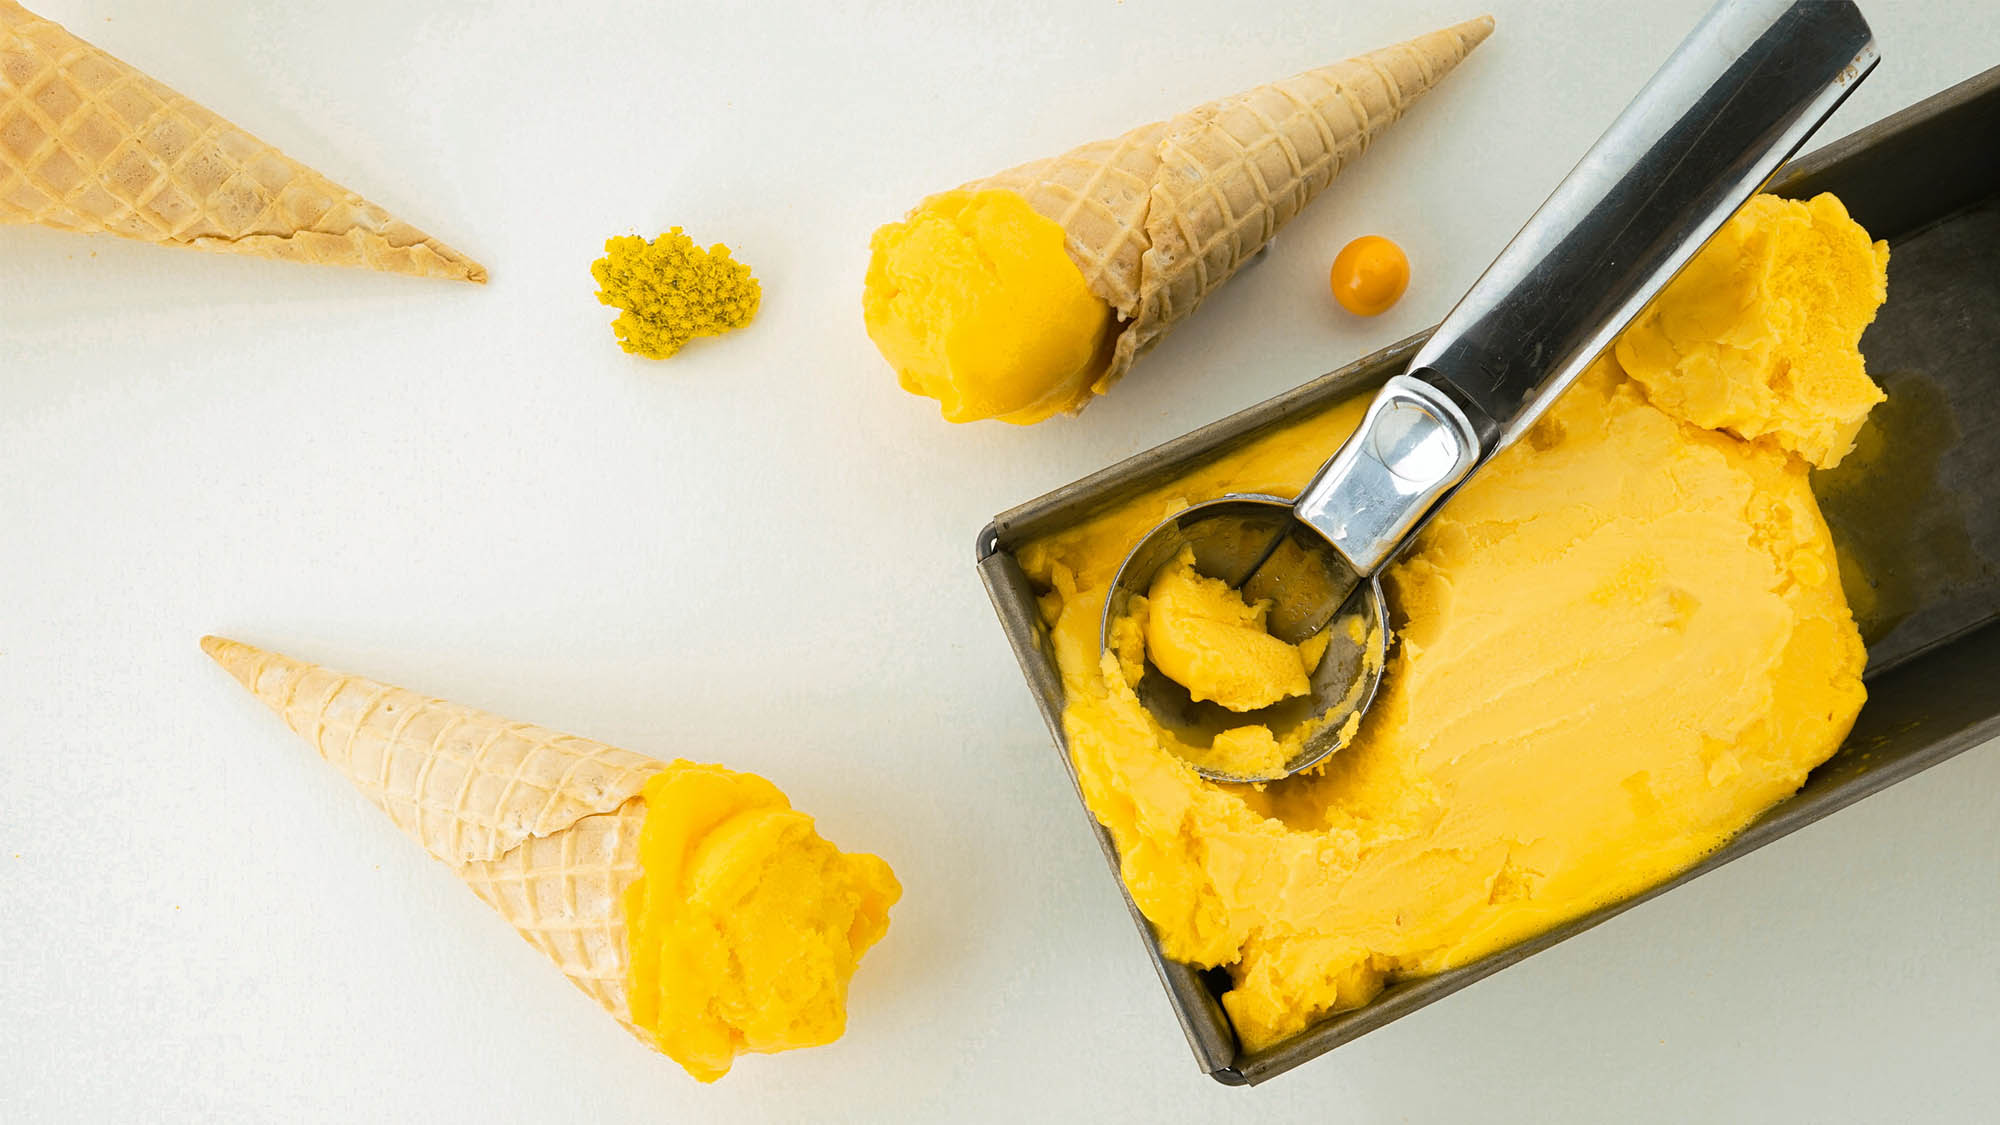 Two sugar cones with yellow ice cream and scoop in yellow ice cream container on white background